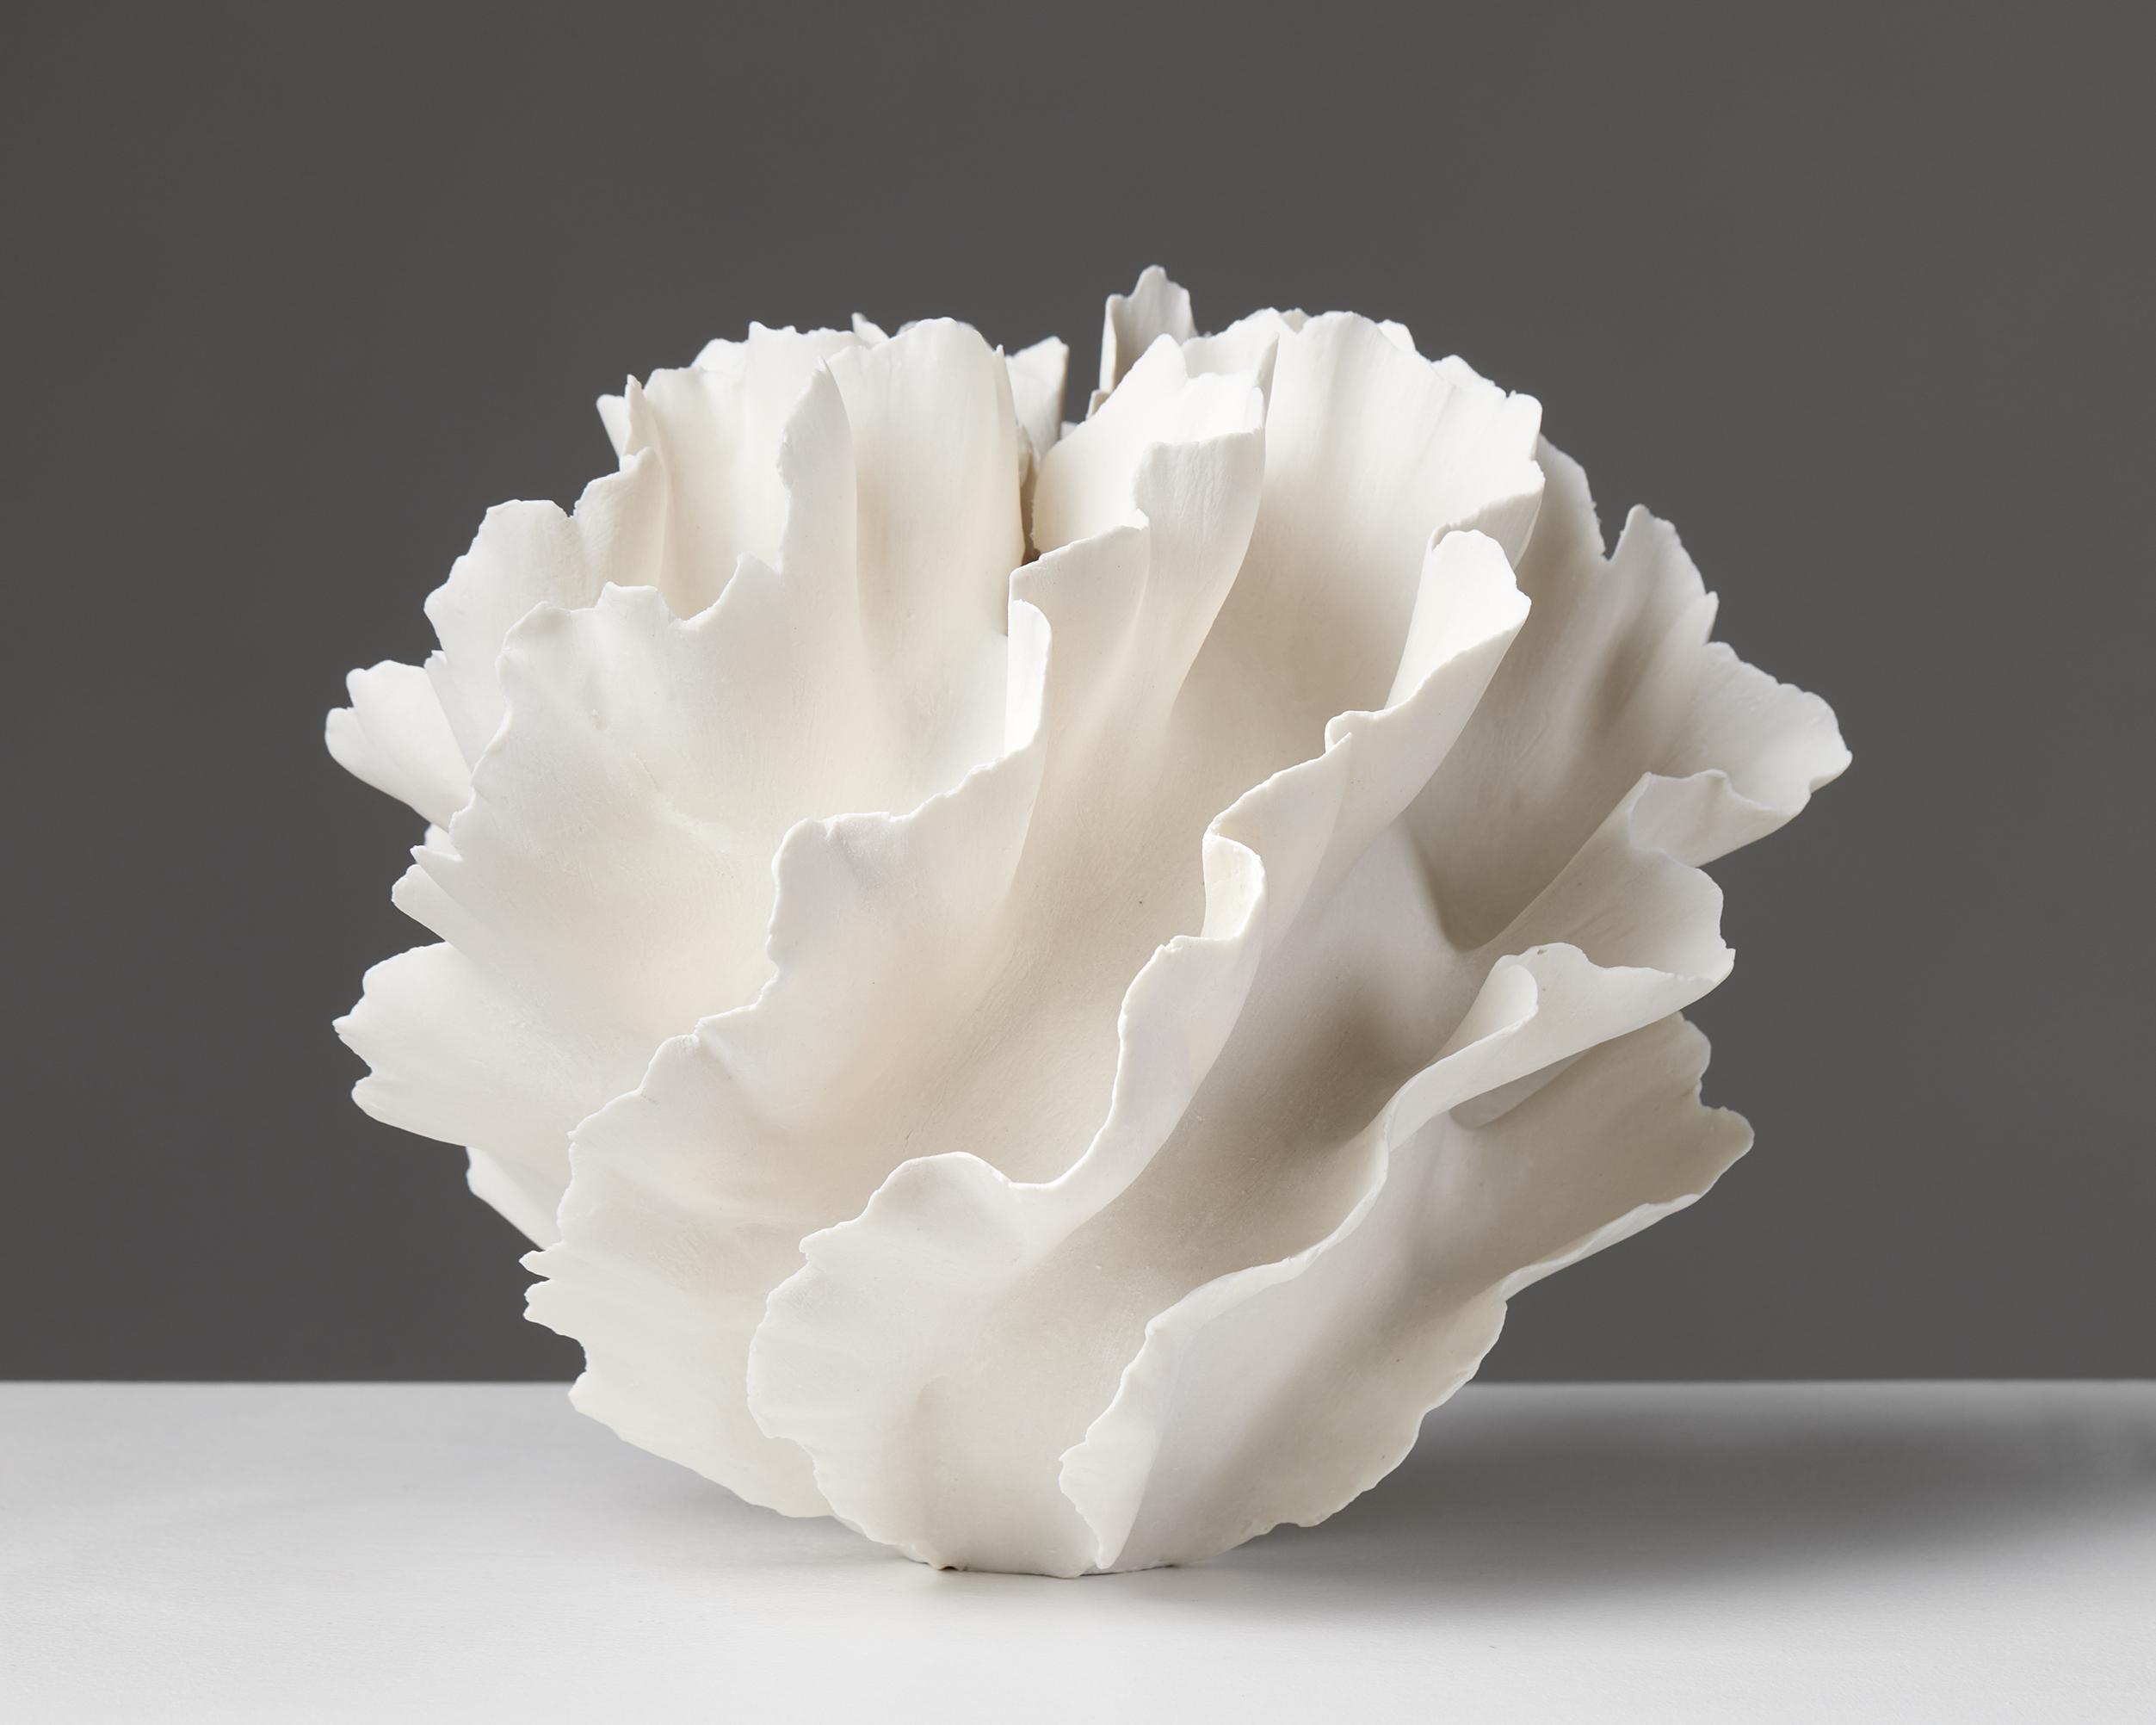 Vessel by Sandra Davolio,
Denmark, 2022.
Porcelain.

Unique.

Signed.

Sandra Davolio is an acclaimed contemporary Danish-Italian ceramic artist who has been represented by Modernity for more than ten years. Davolio takes her inspiration